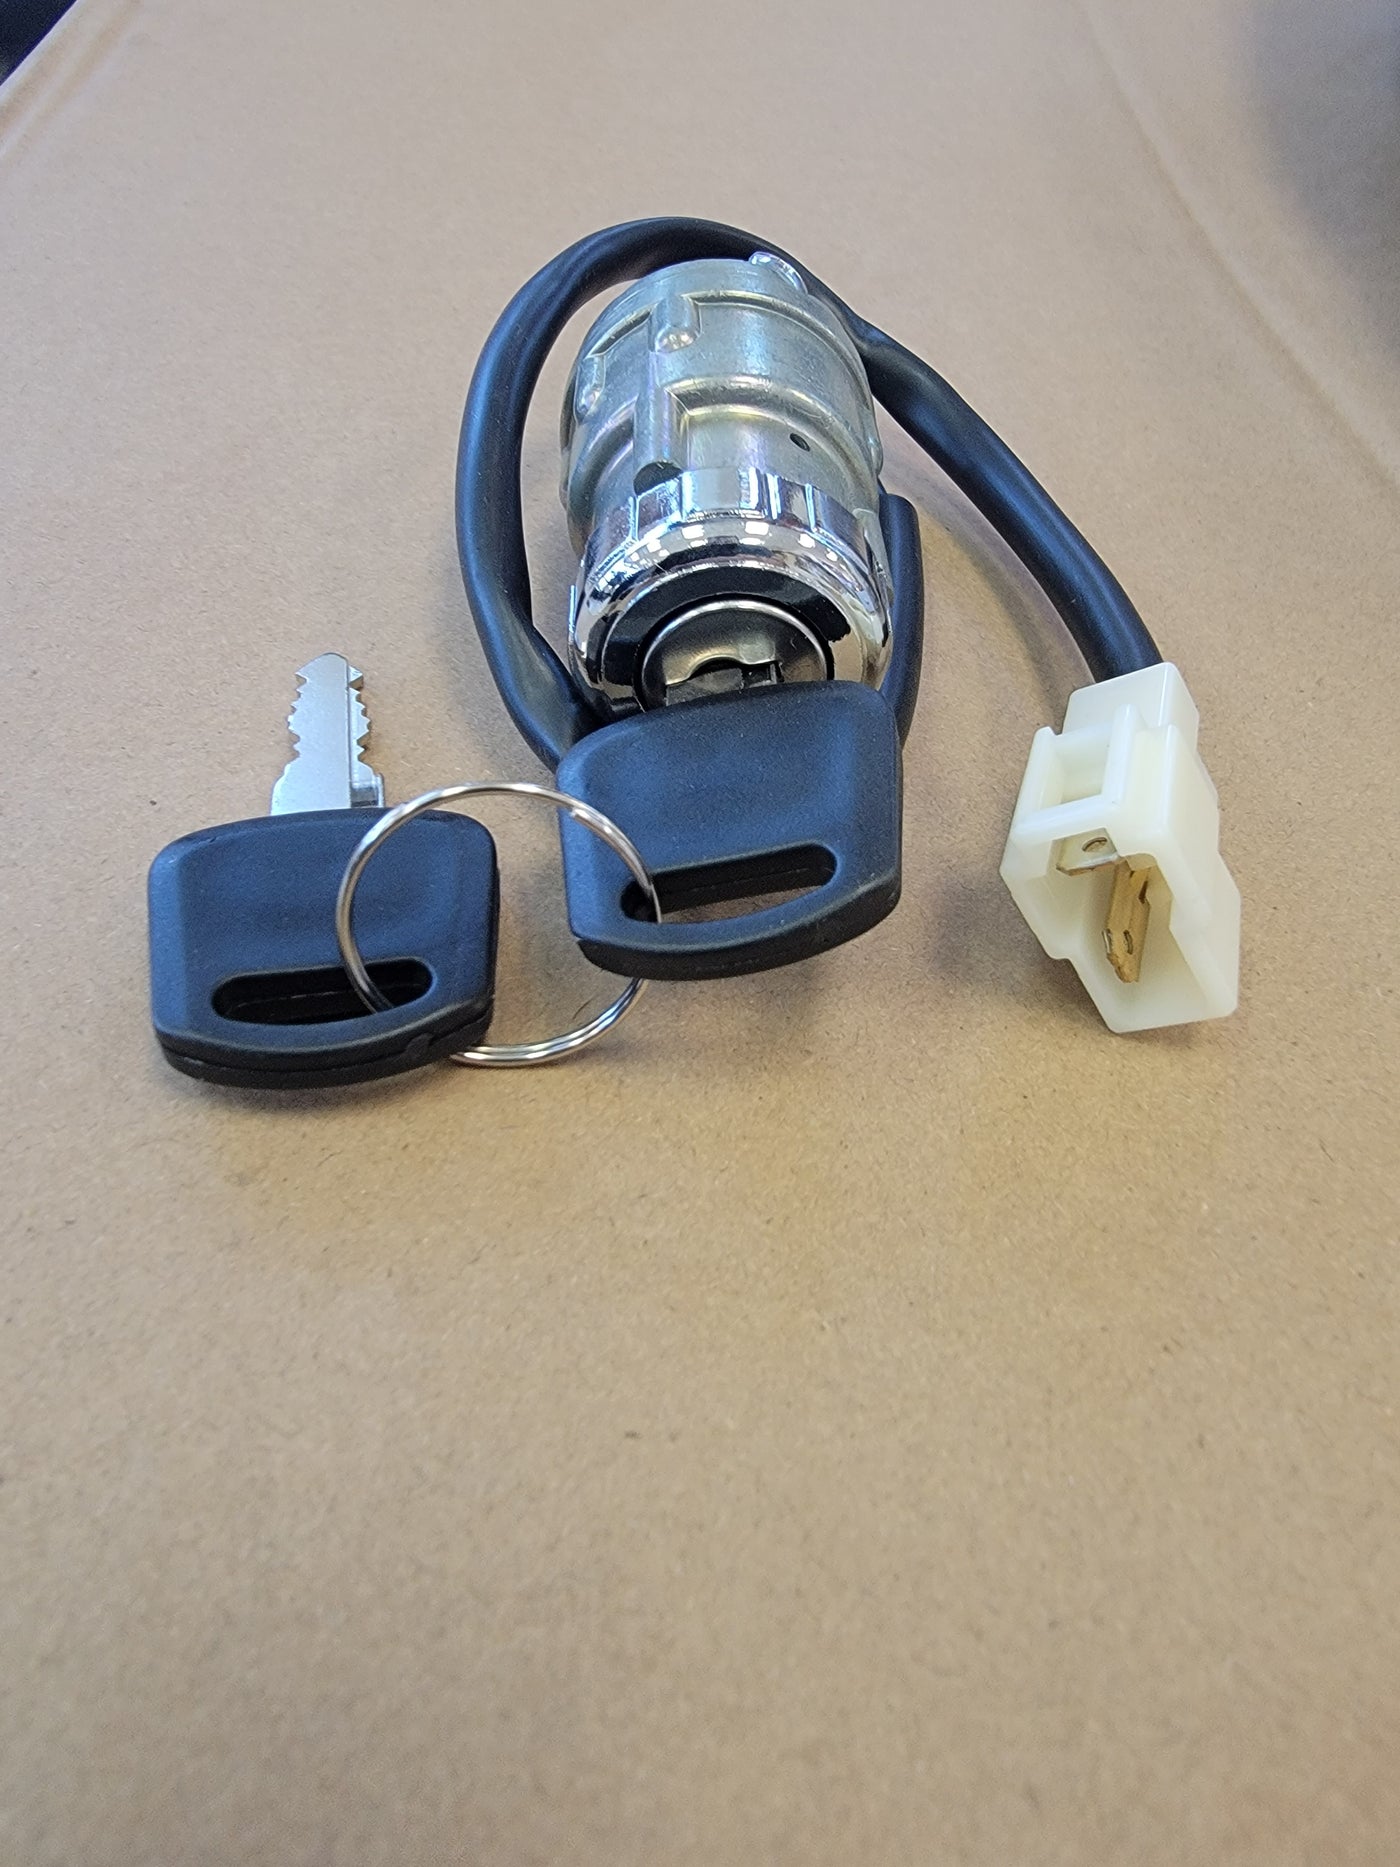 Evoution Golf Cart Replacement Key Switch With Unique Keys